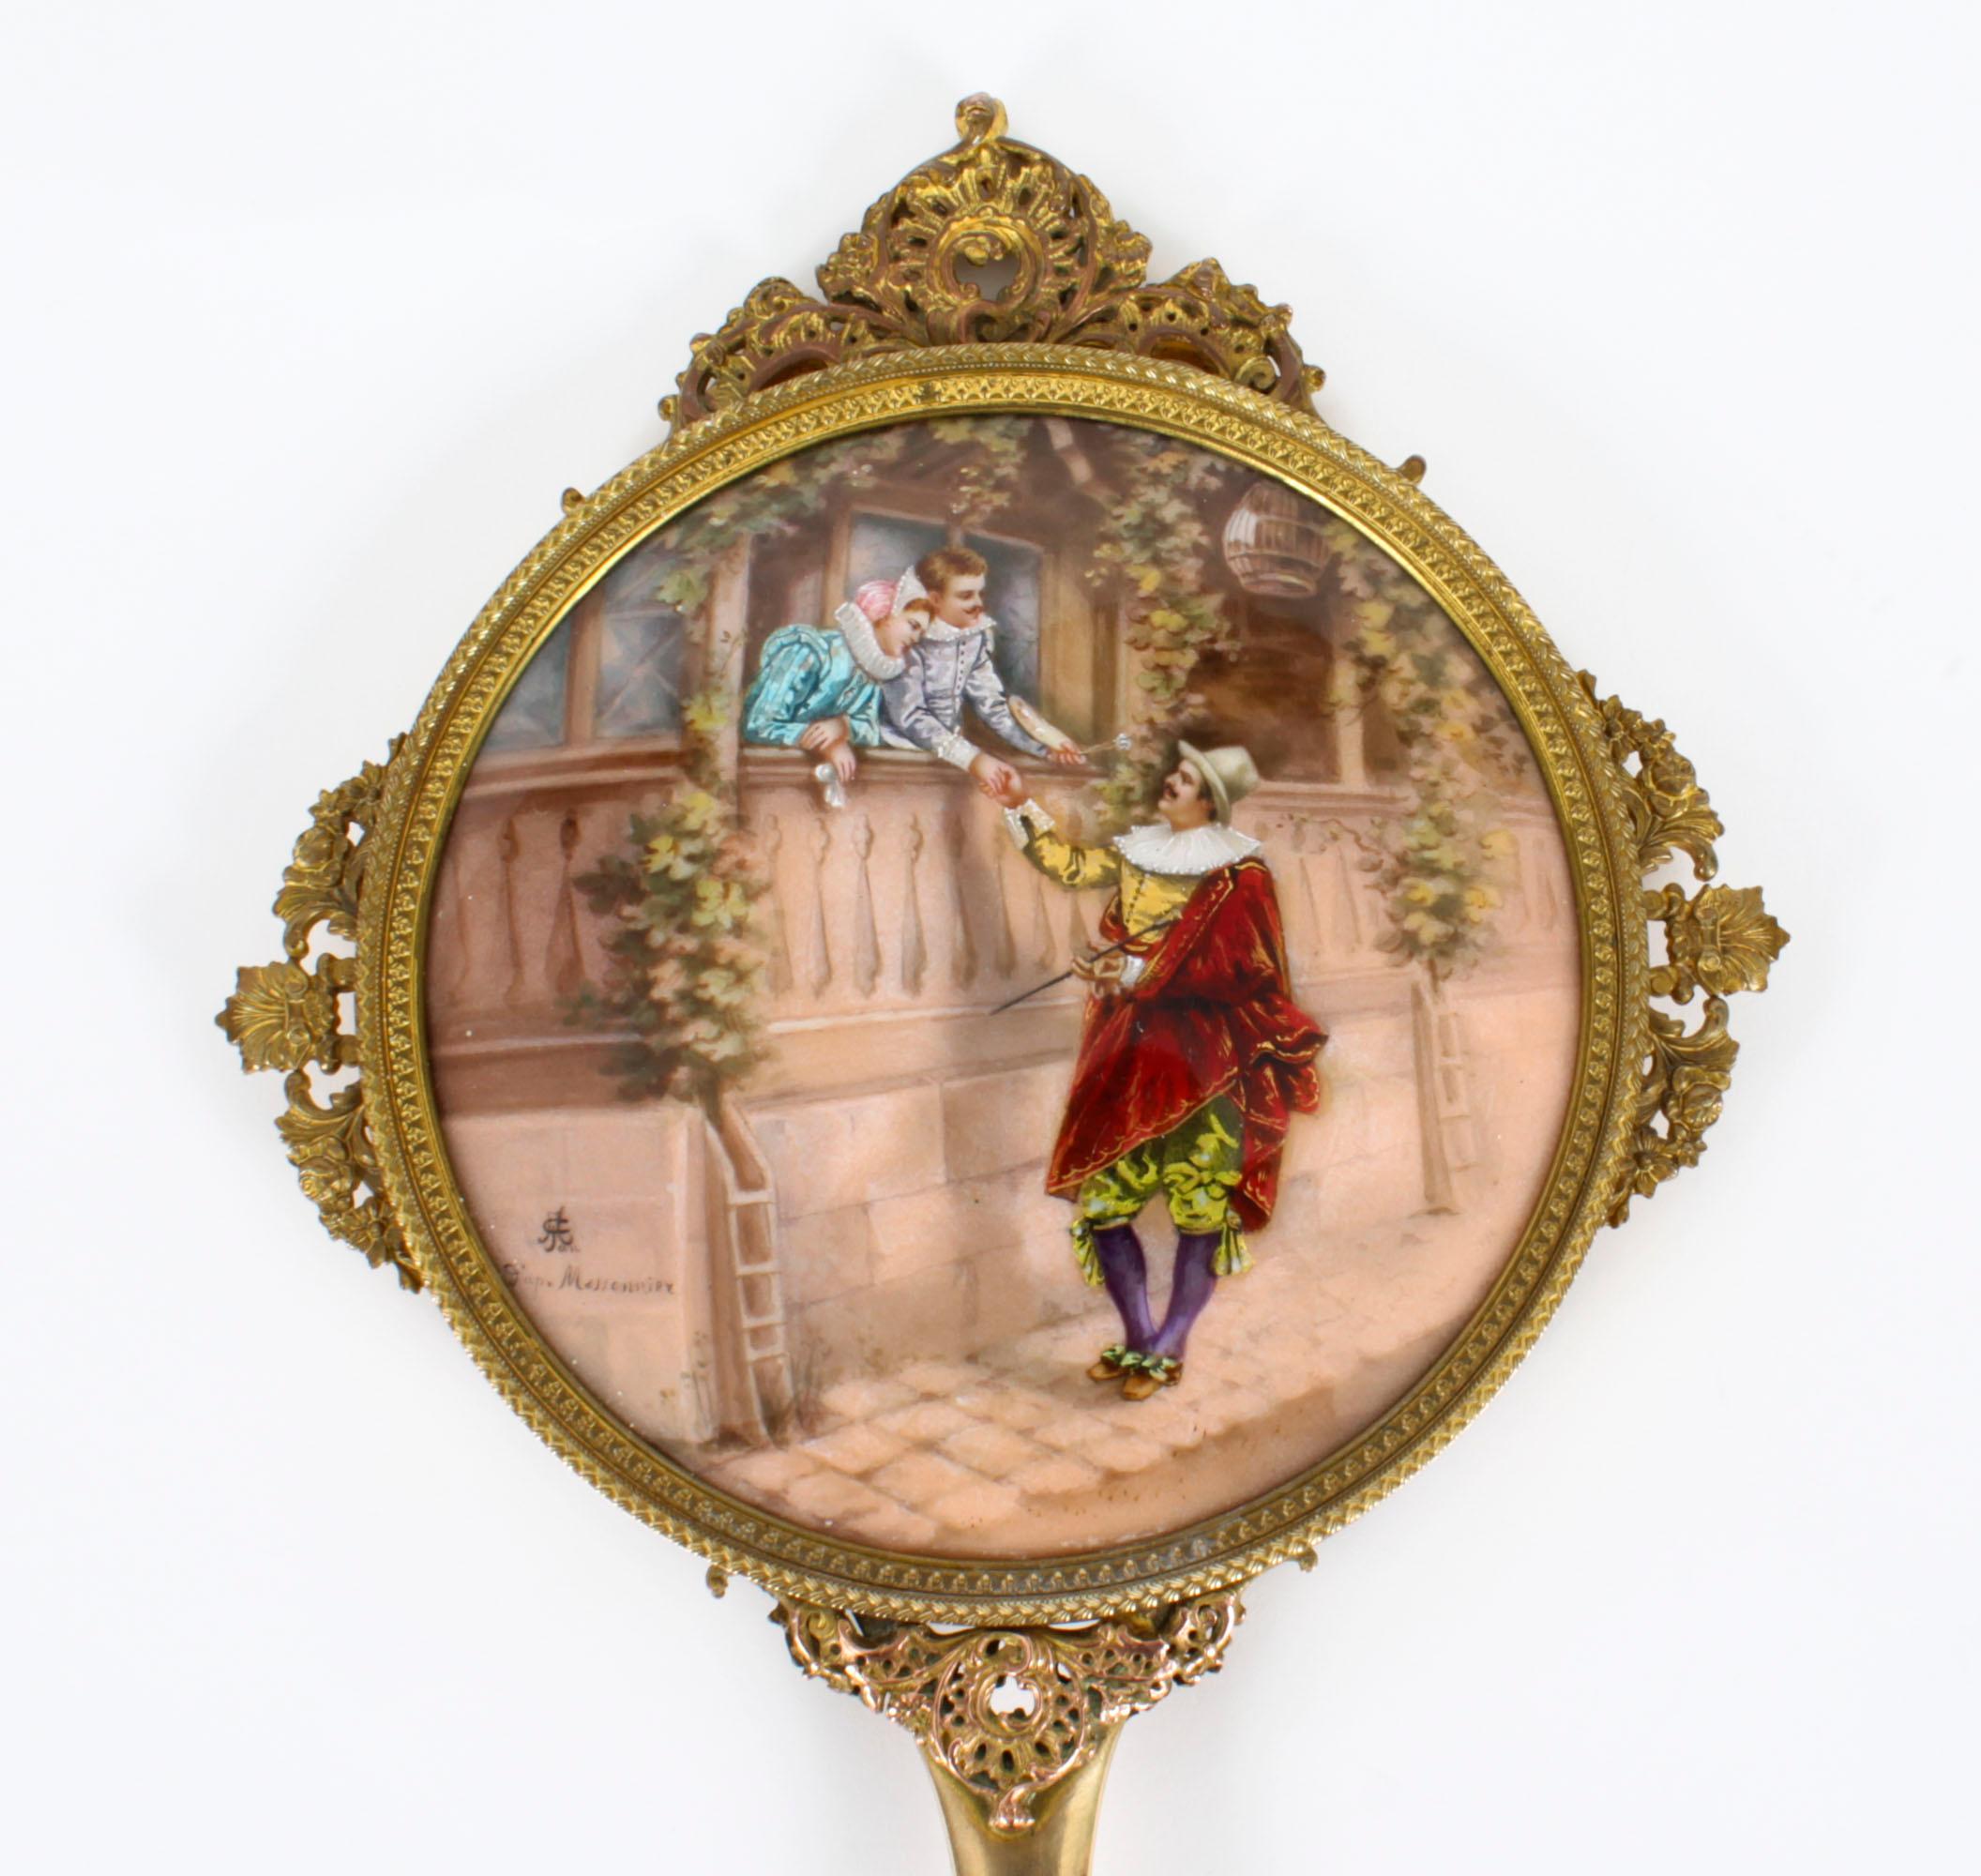 This is a wonderful antique French Limoges panelled ormolu hand-mirror, signed by the artist Joseph Meissonnier, Circa 1890.
 
The circular frame has a pierced scrolling foliated border enclosing a convex centre enameled classical scene with